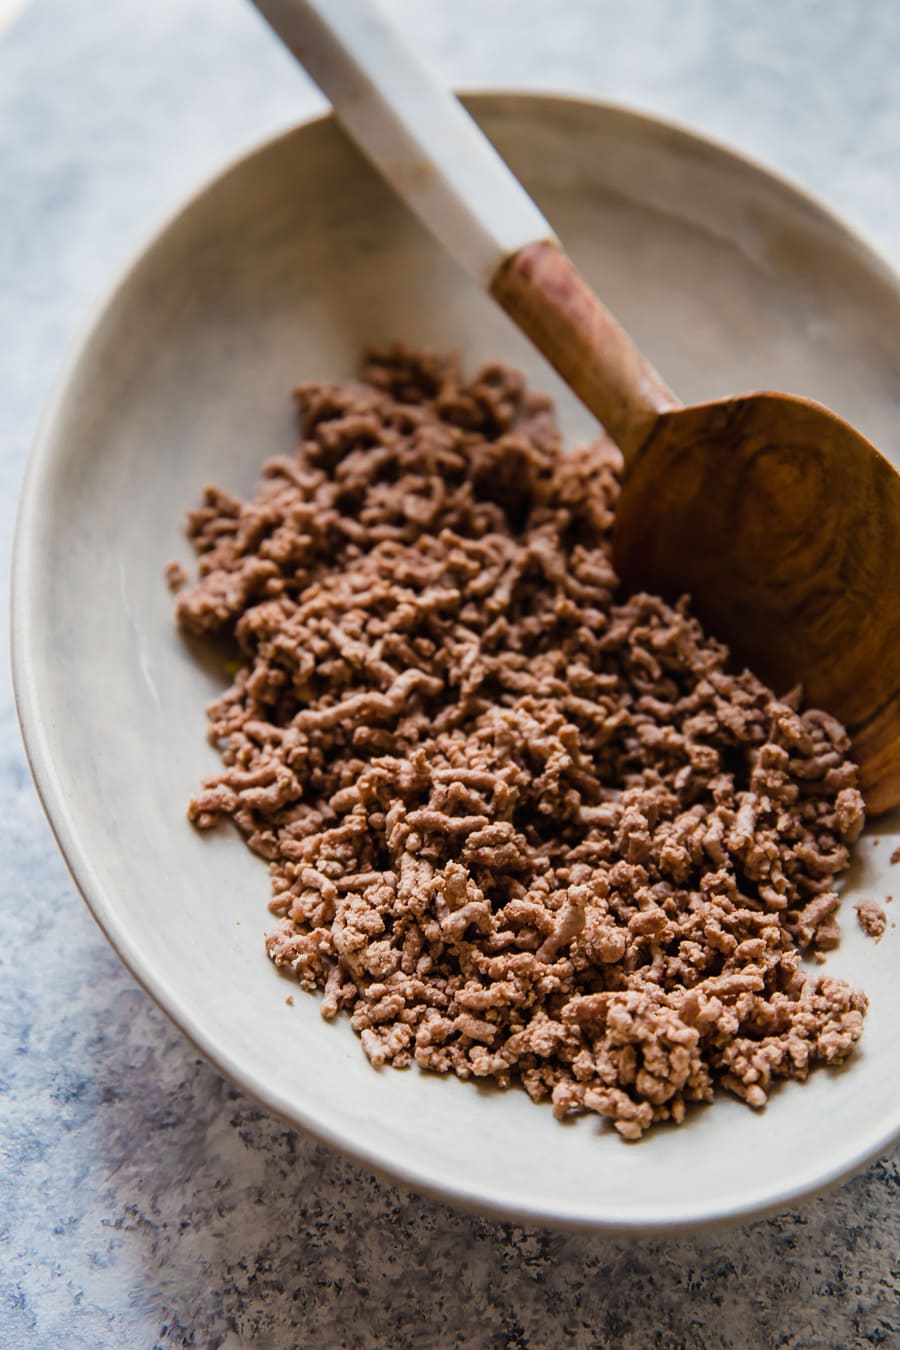 Wondering how to cook ground beef? Frying is a popular option, but boiling ground beef is easy, quick, and it creates leaner meat! Cooking ground beef with this method creates the perfect crumbled ground beef for tacos, chili, spaghetti sauce, and more.